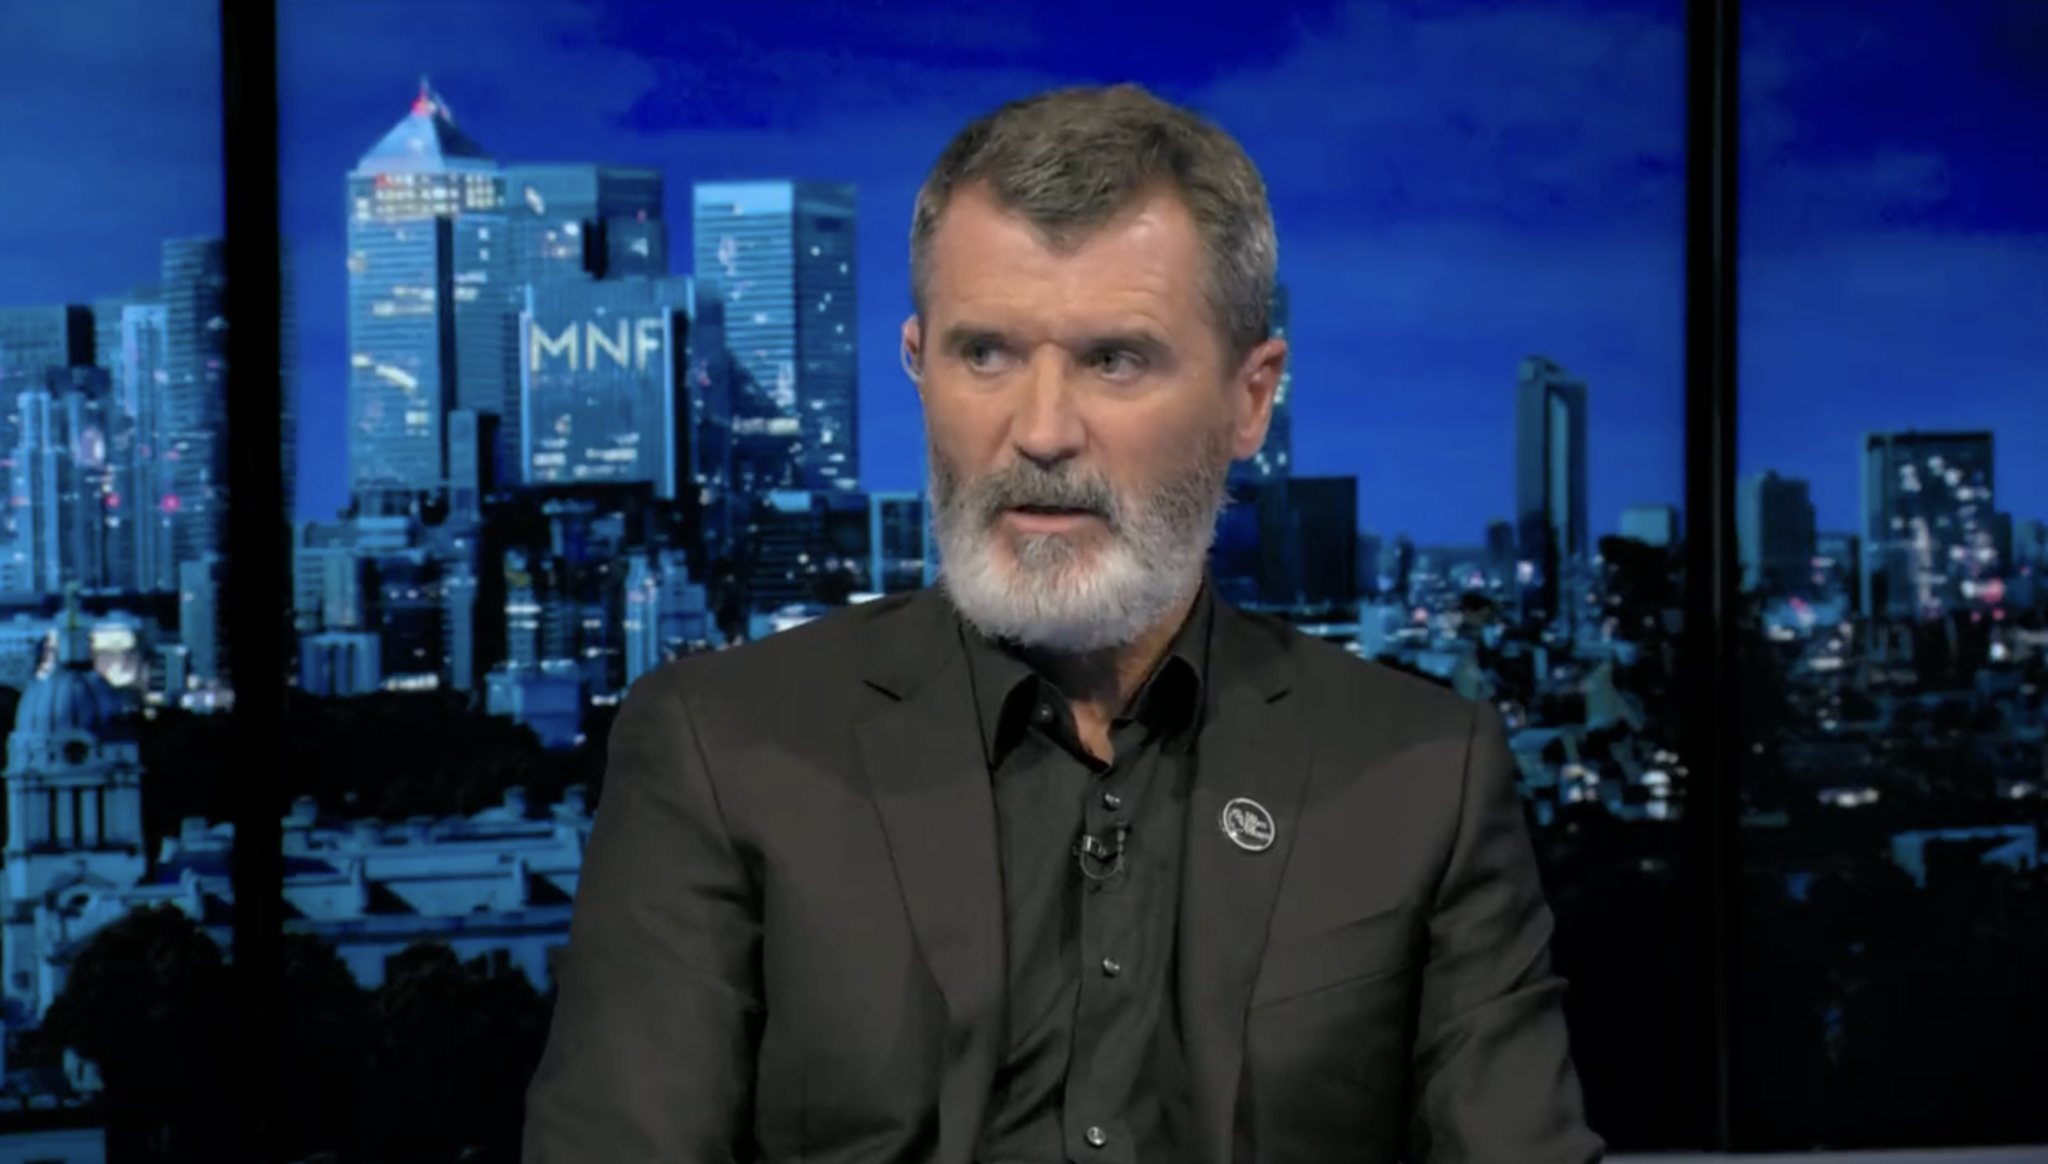 Roy Keane explains why he’d rather be at a hurling final than the Super Bowl